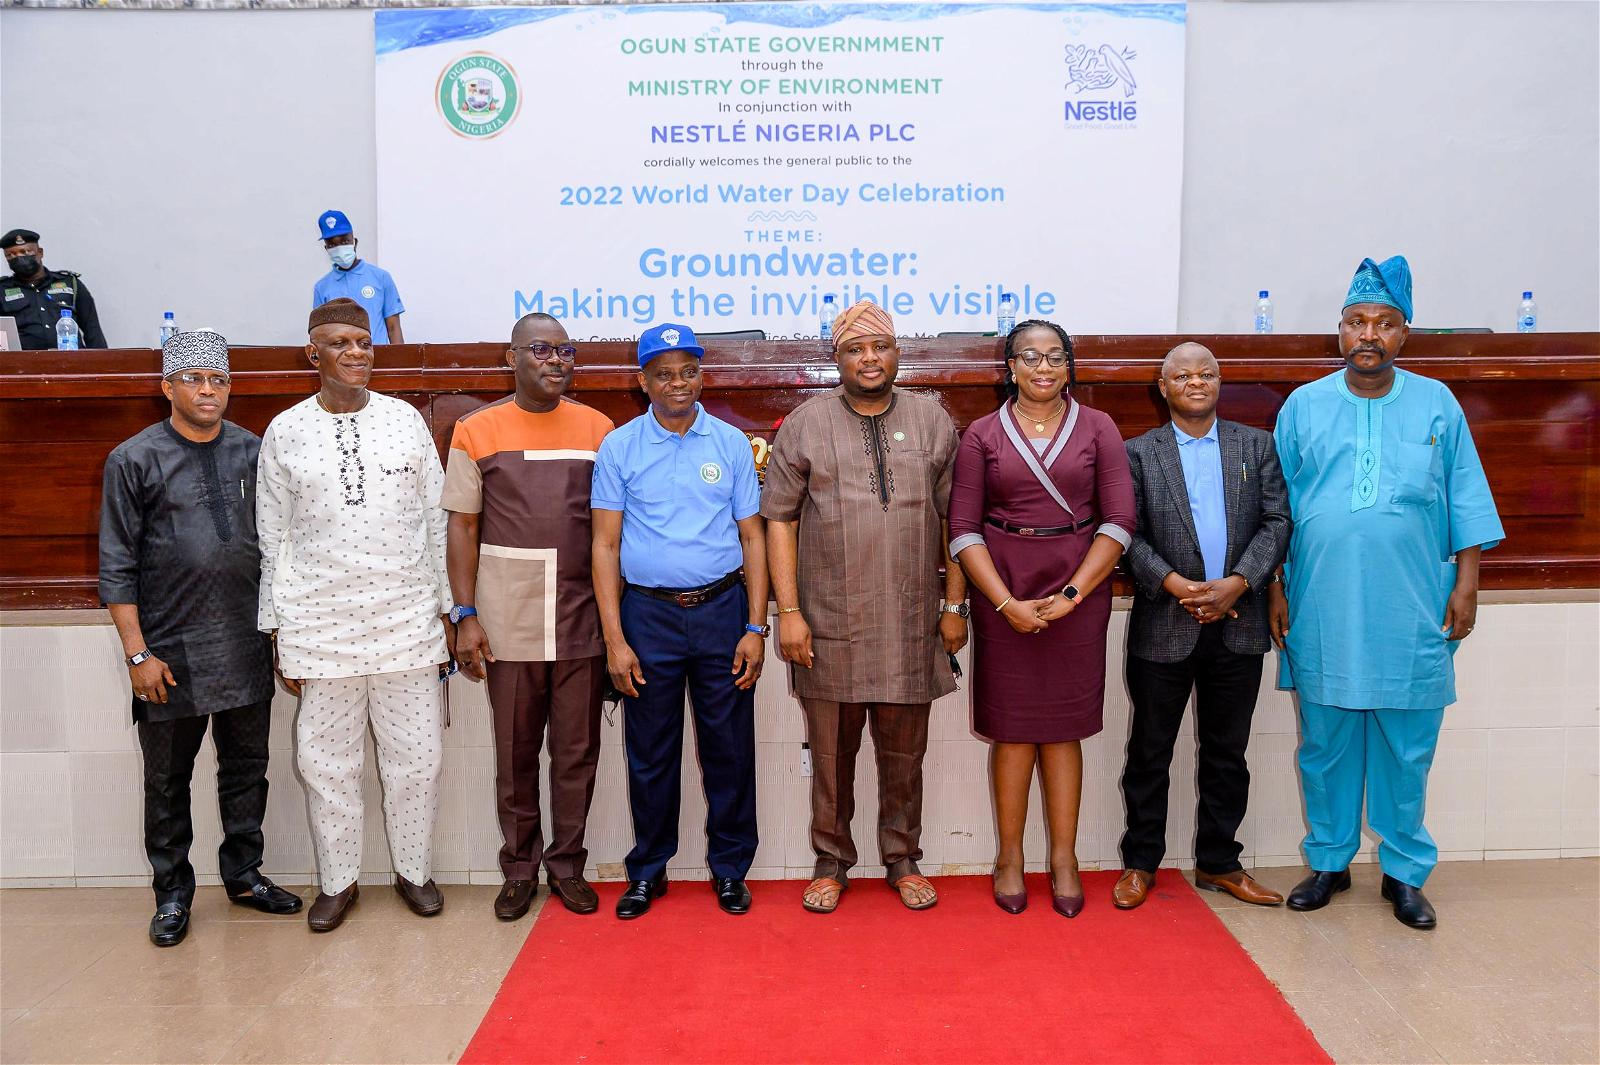 Ogun State Ministry of Environment, Nestlé Nigeria collaborate to mark 2022 World Water Day - Vanguard News